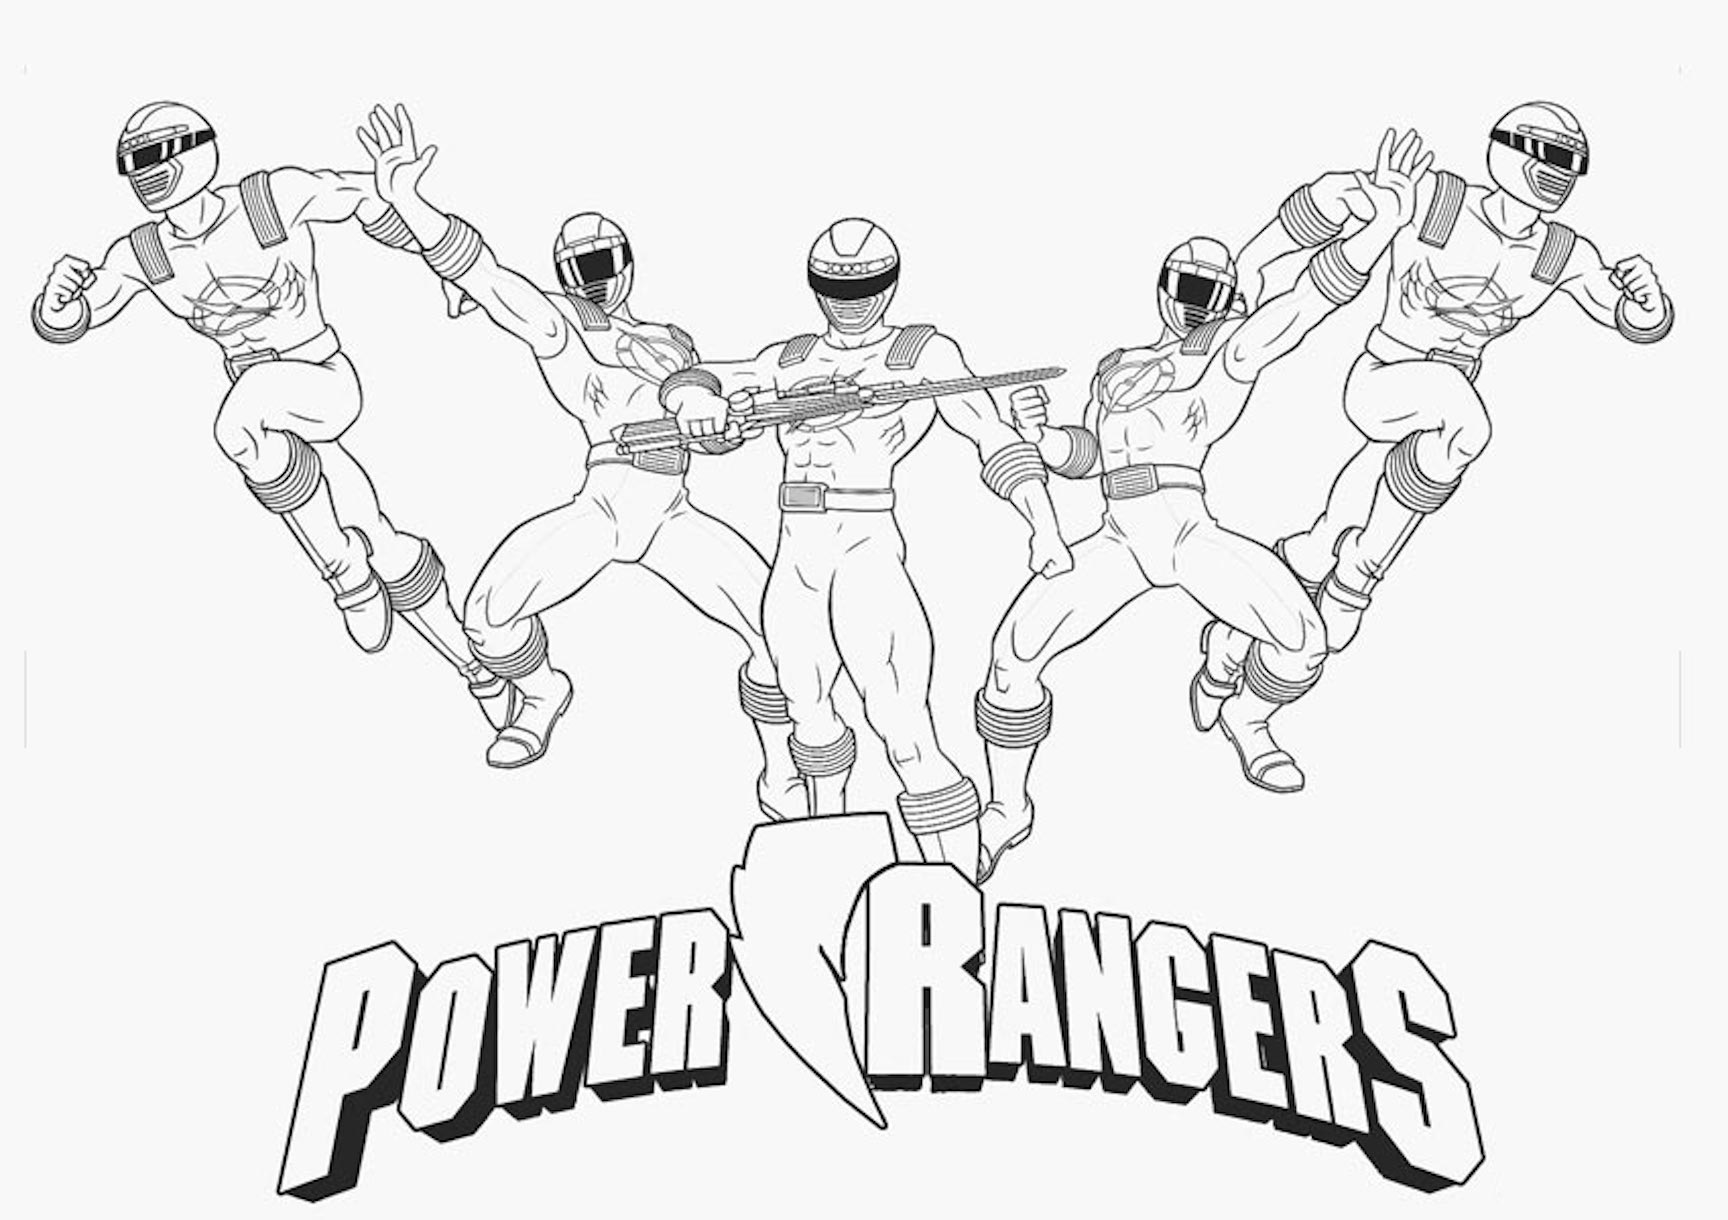 Power Rangers Coloring Pages And Other Top 10 Coloring Themes